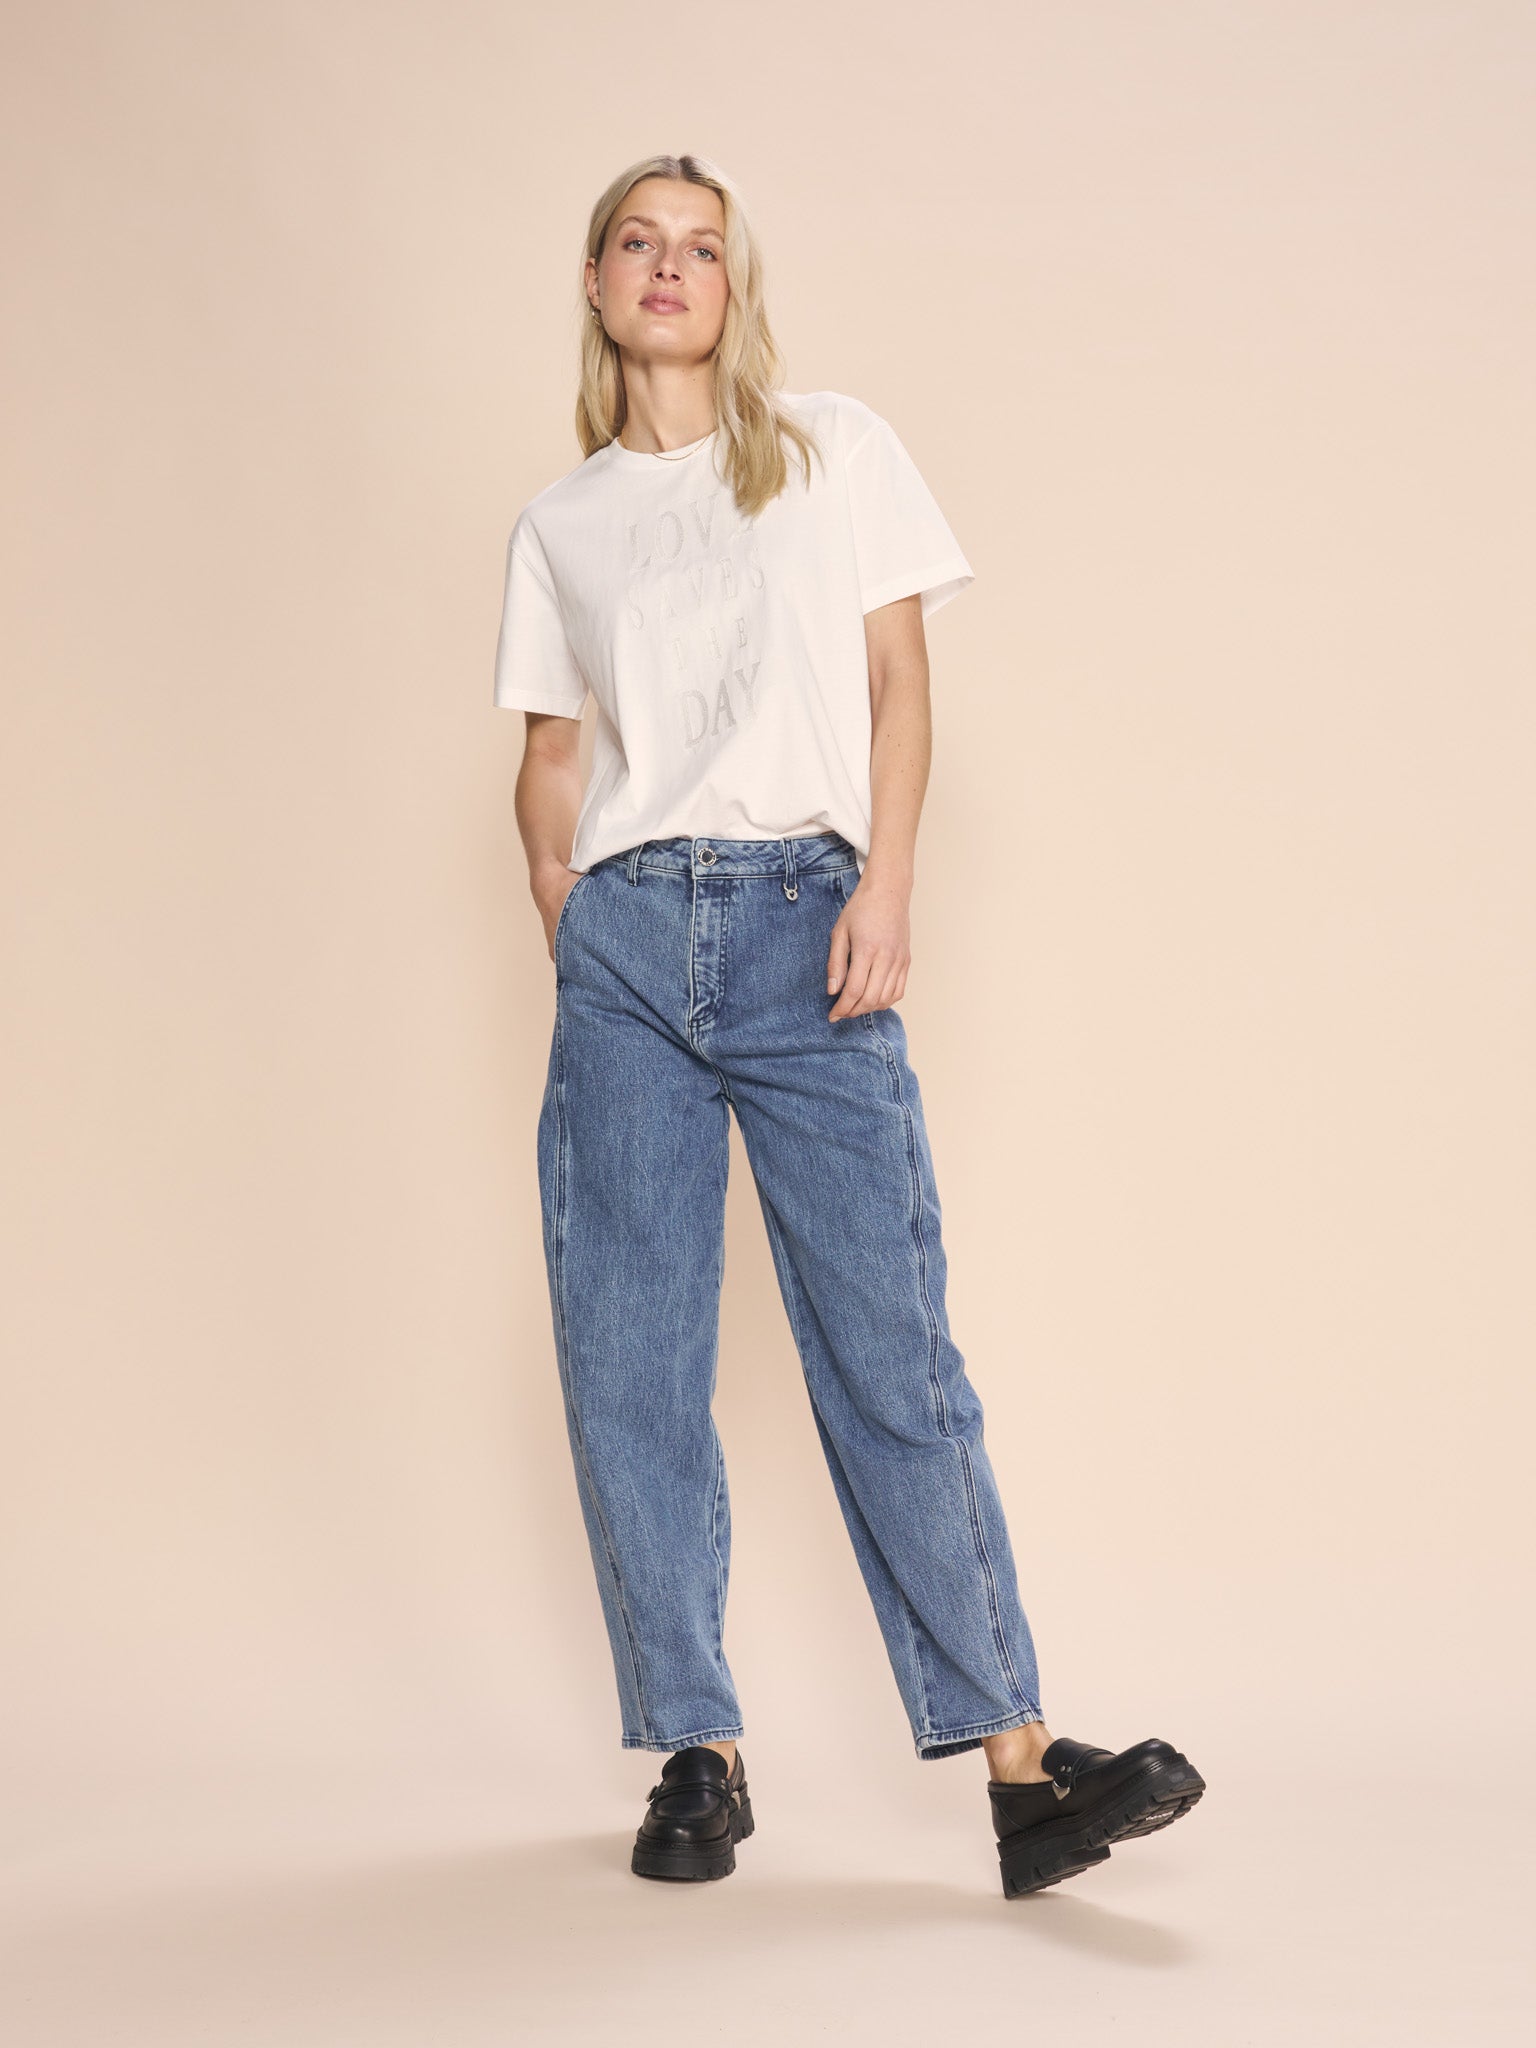 Jeans Guide – MOS MOSH